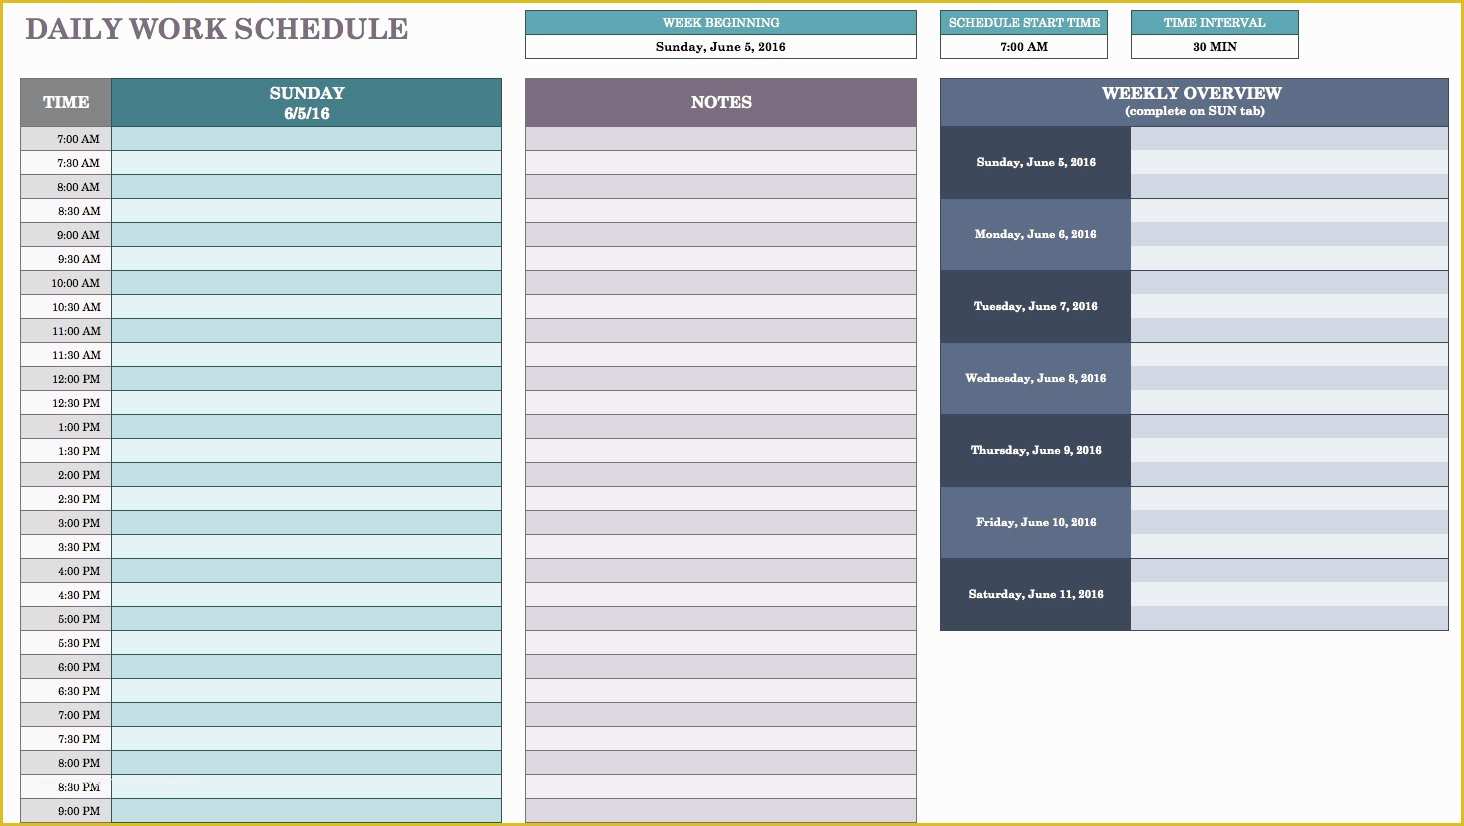 Schedule Template Free Download Of Free Daily Schedule Templates for Excel Smartsheet